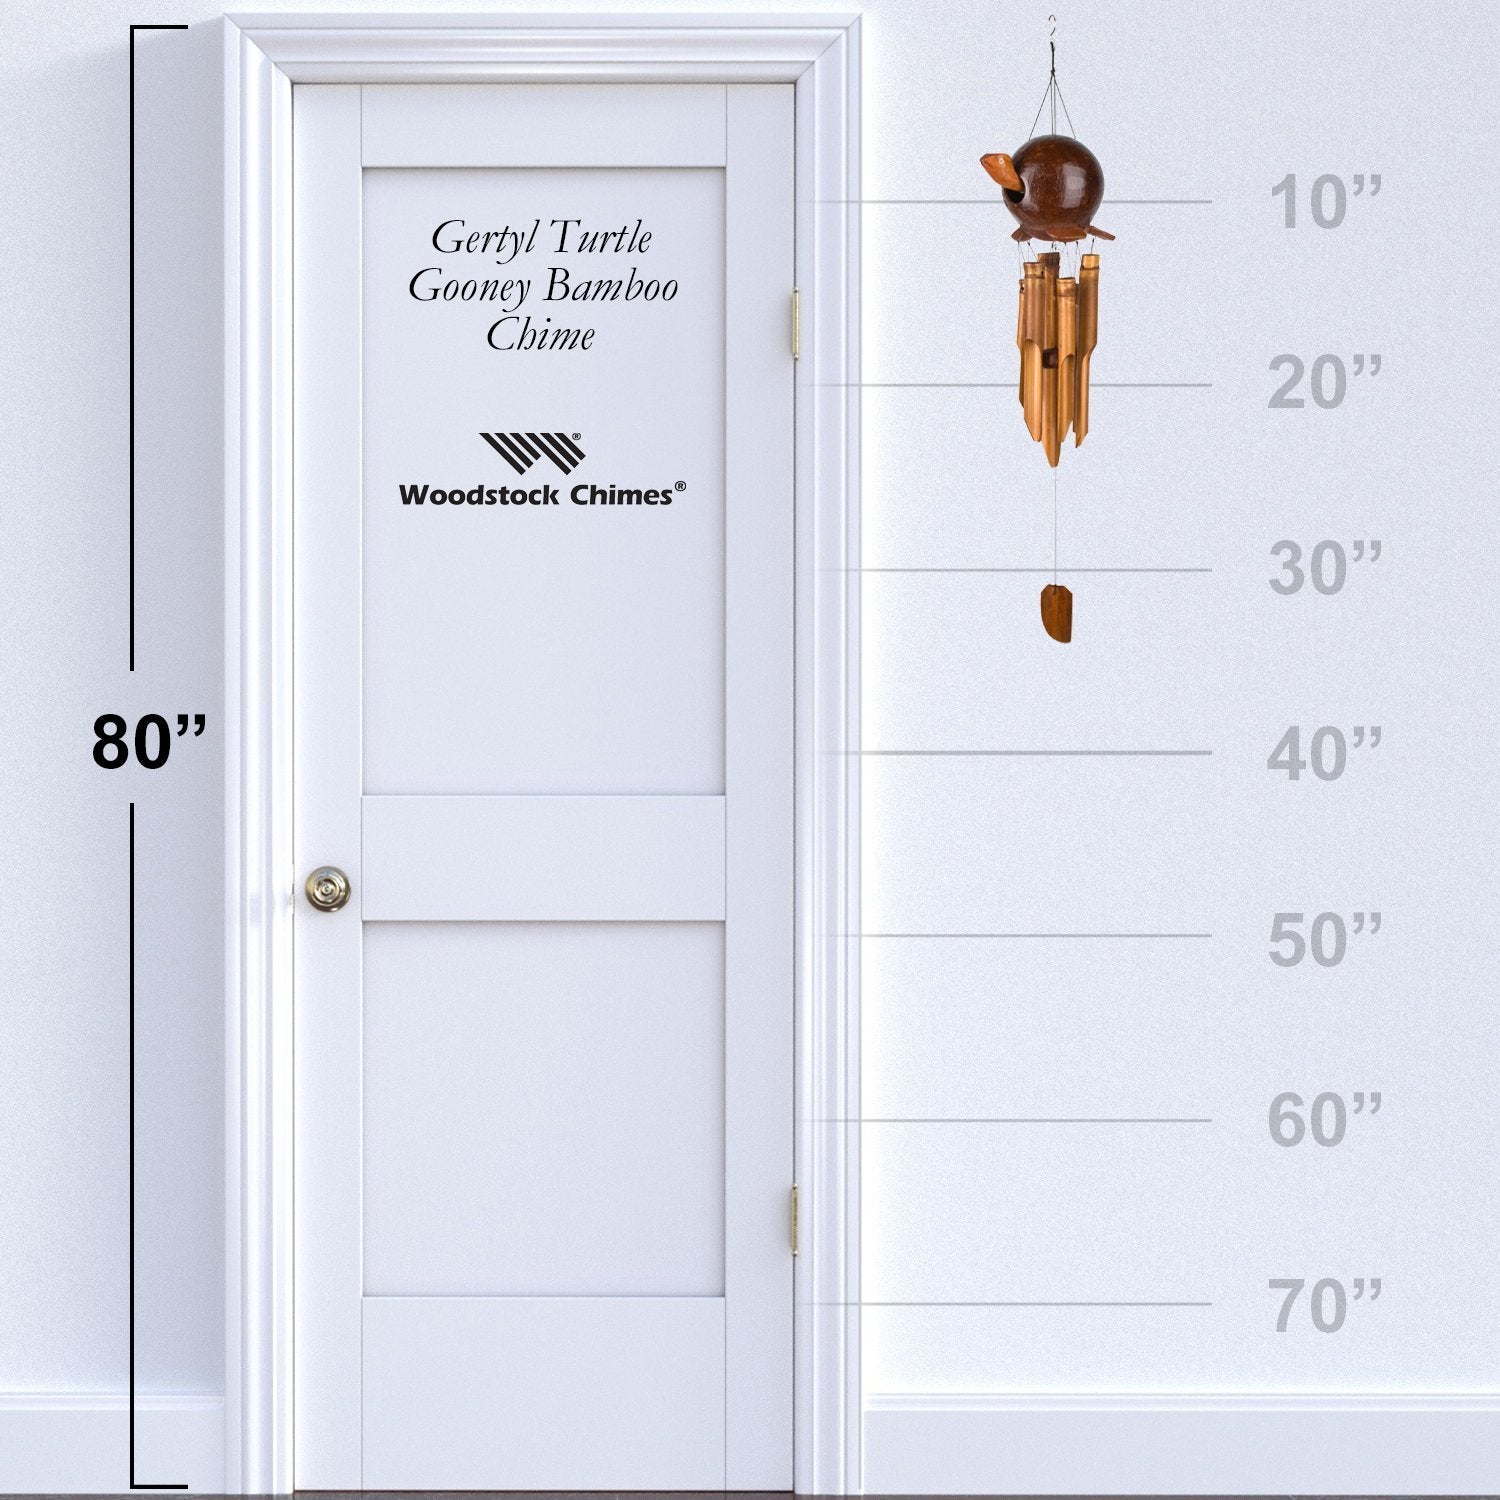 Gertyl Turtle Gooney Bamboo Chime proportion image